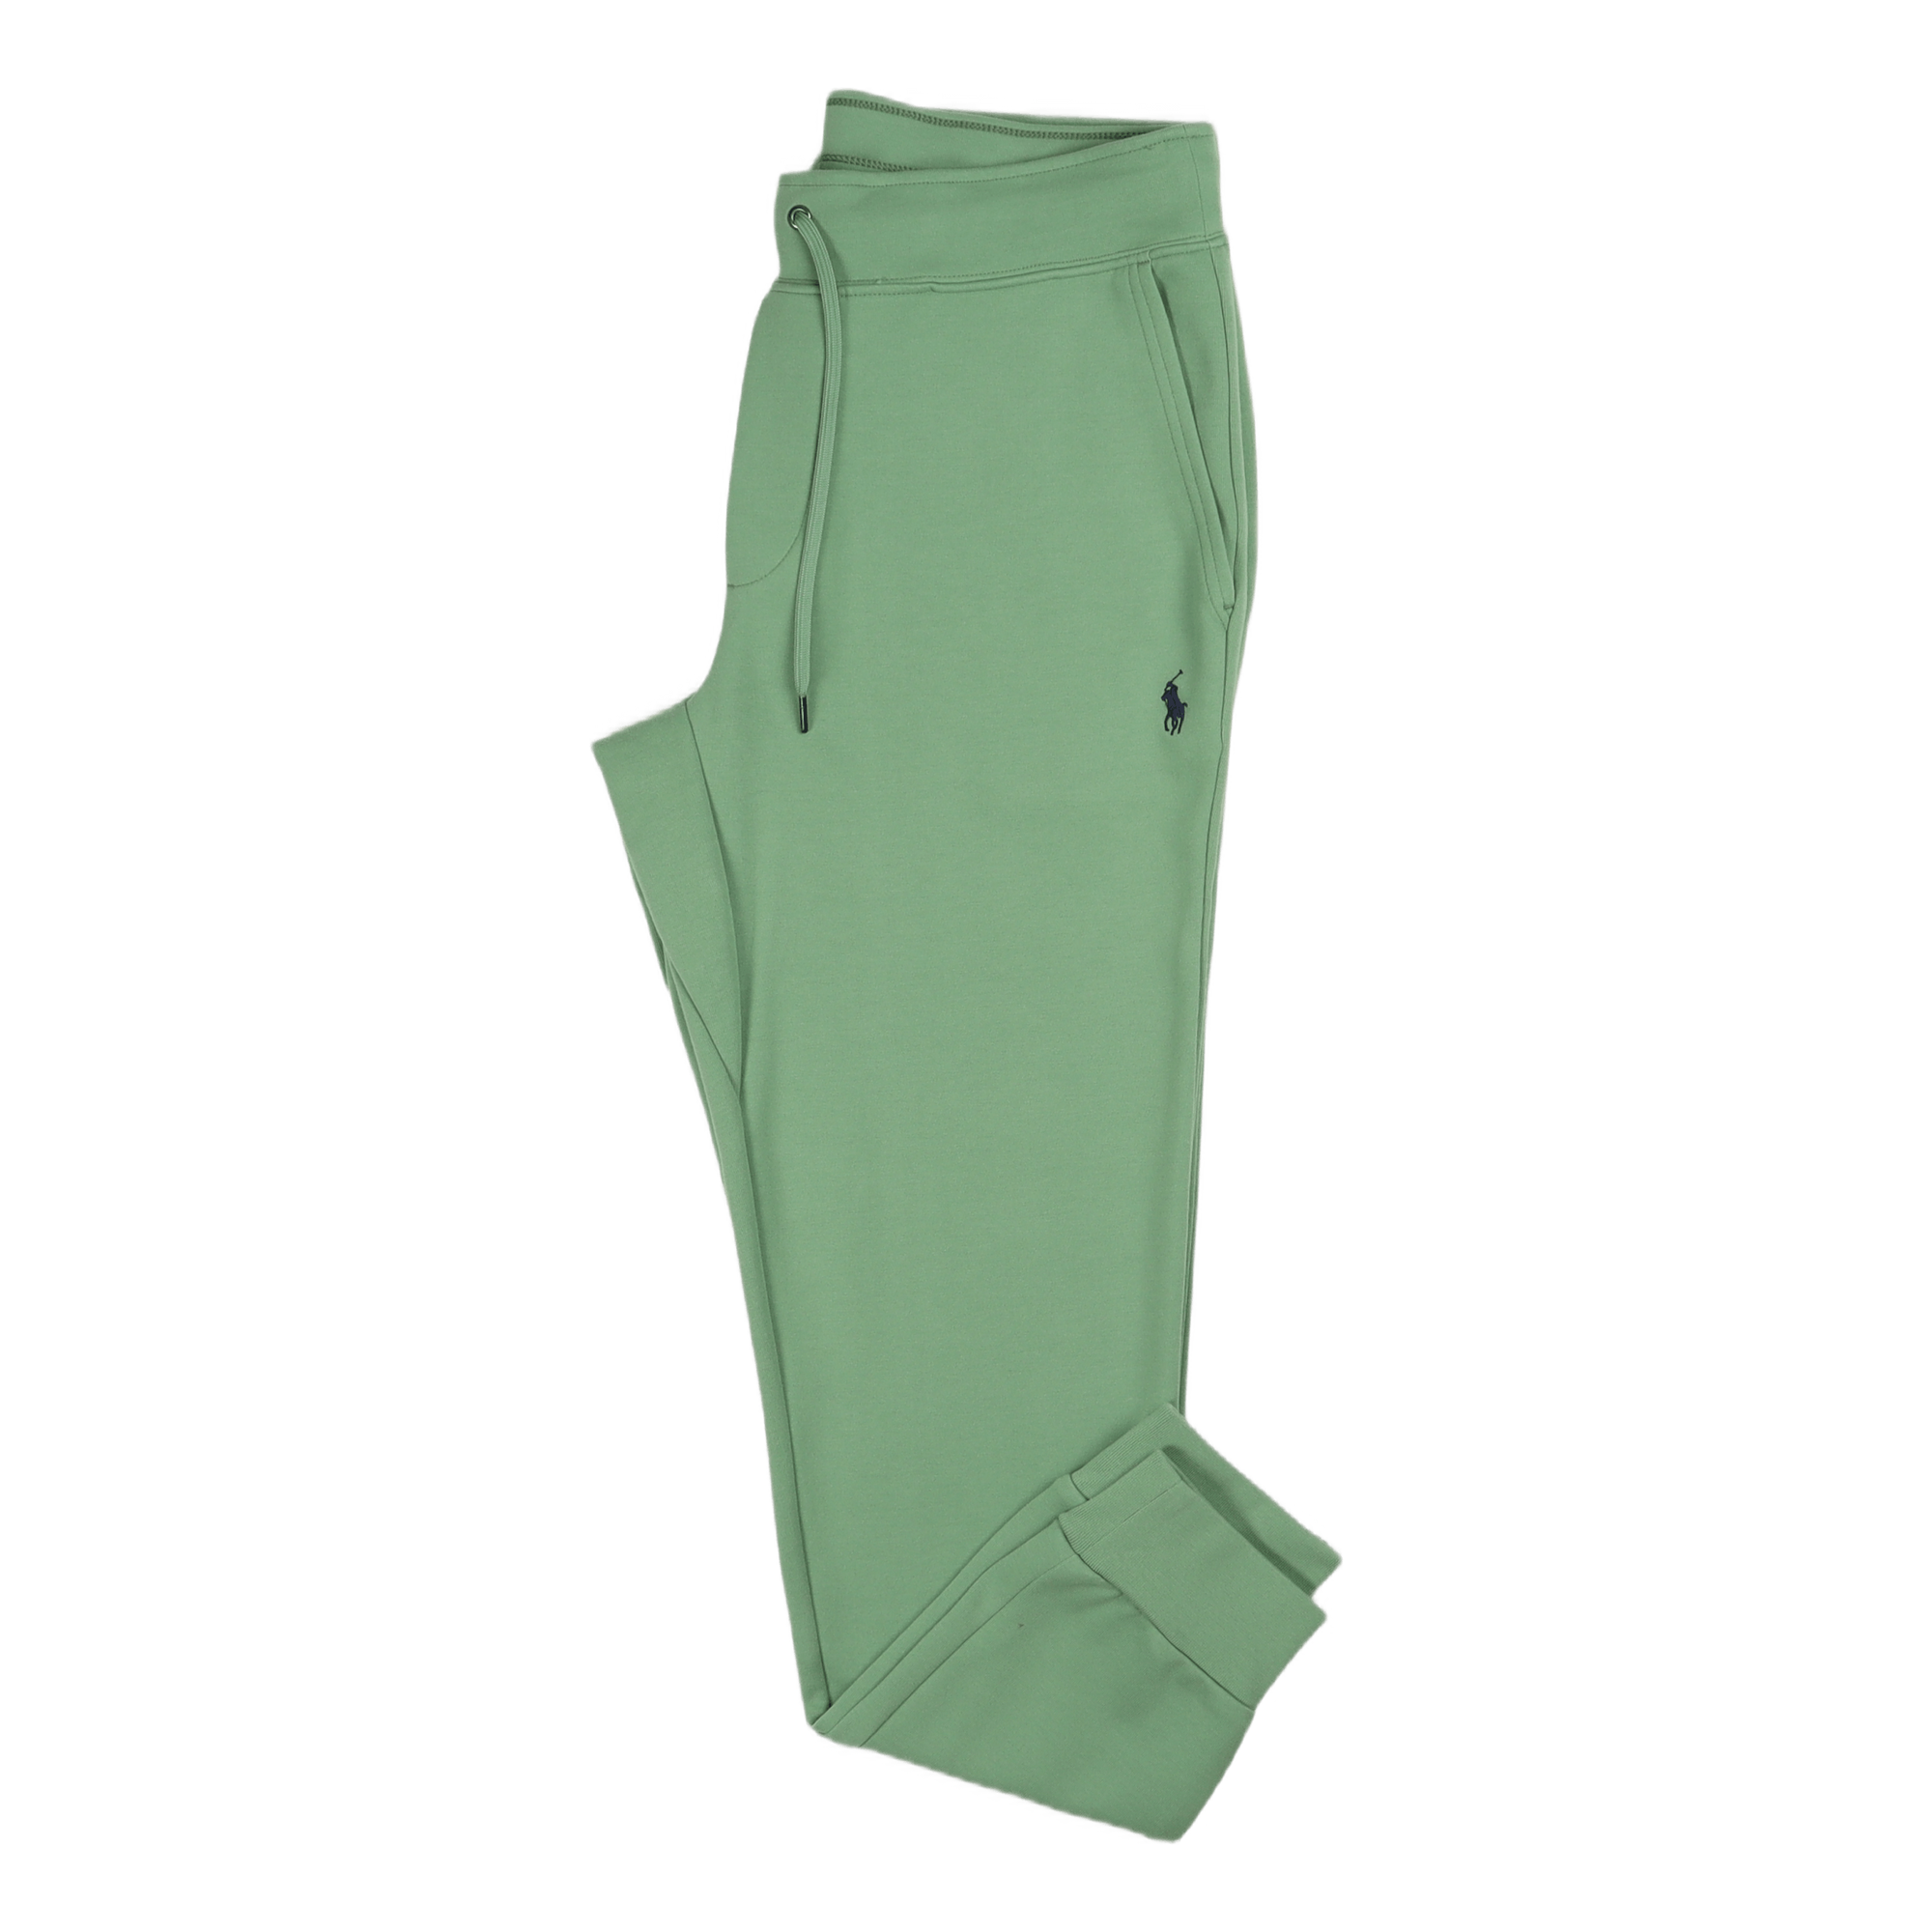 Double-Knit Jogger Pant Outback Green